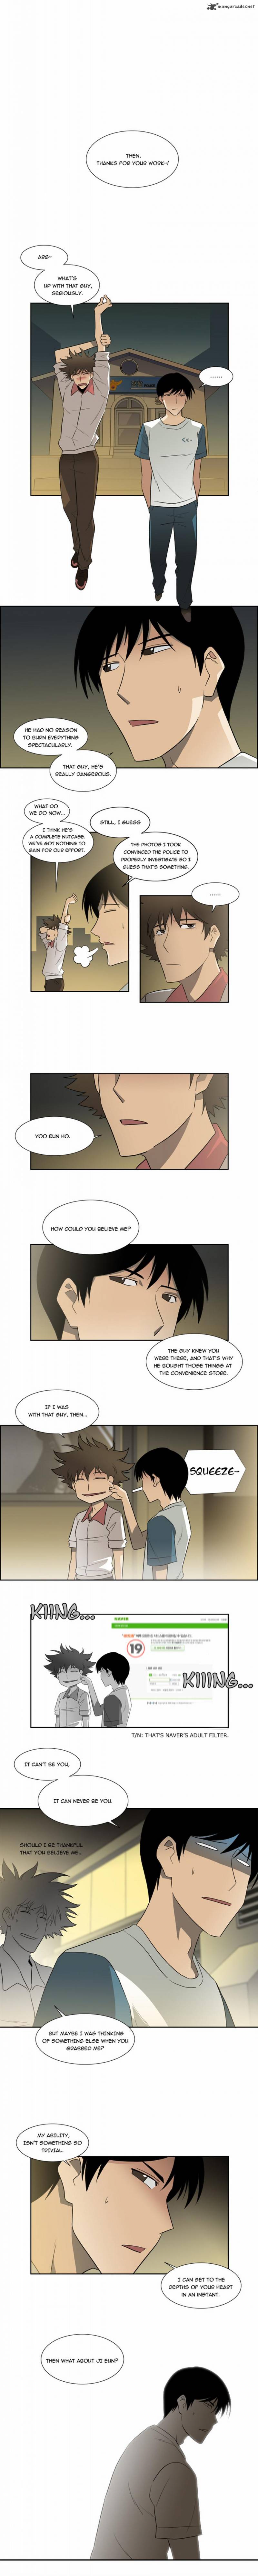 Melo Holic Chapter 31 Page 2